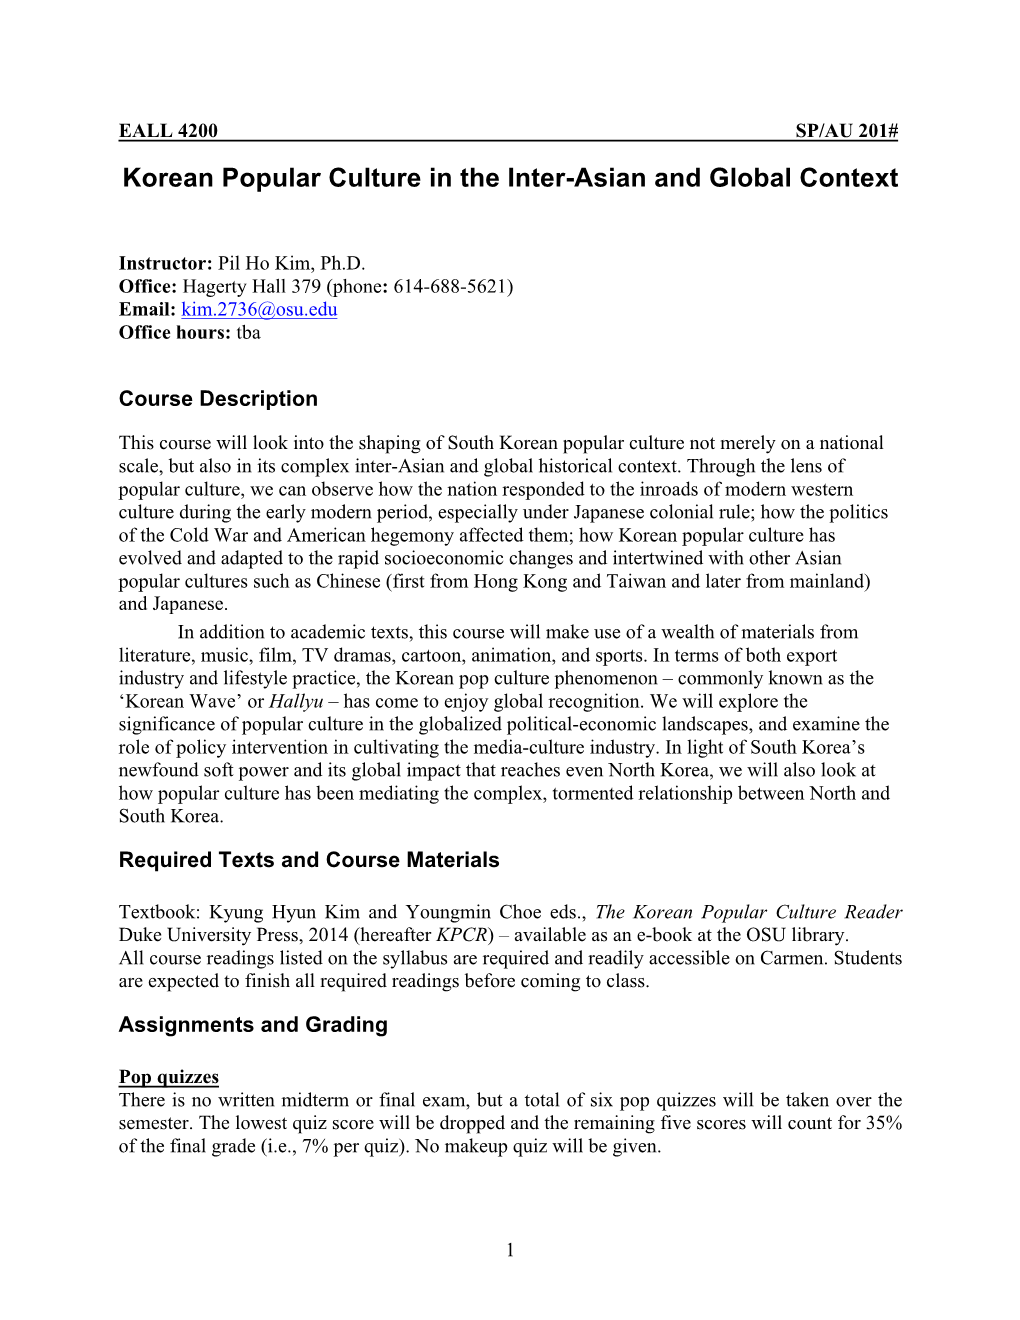 Korean Popular Culture in the Inter-Asian and Global Context